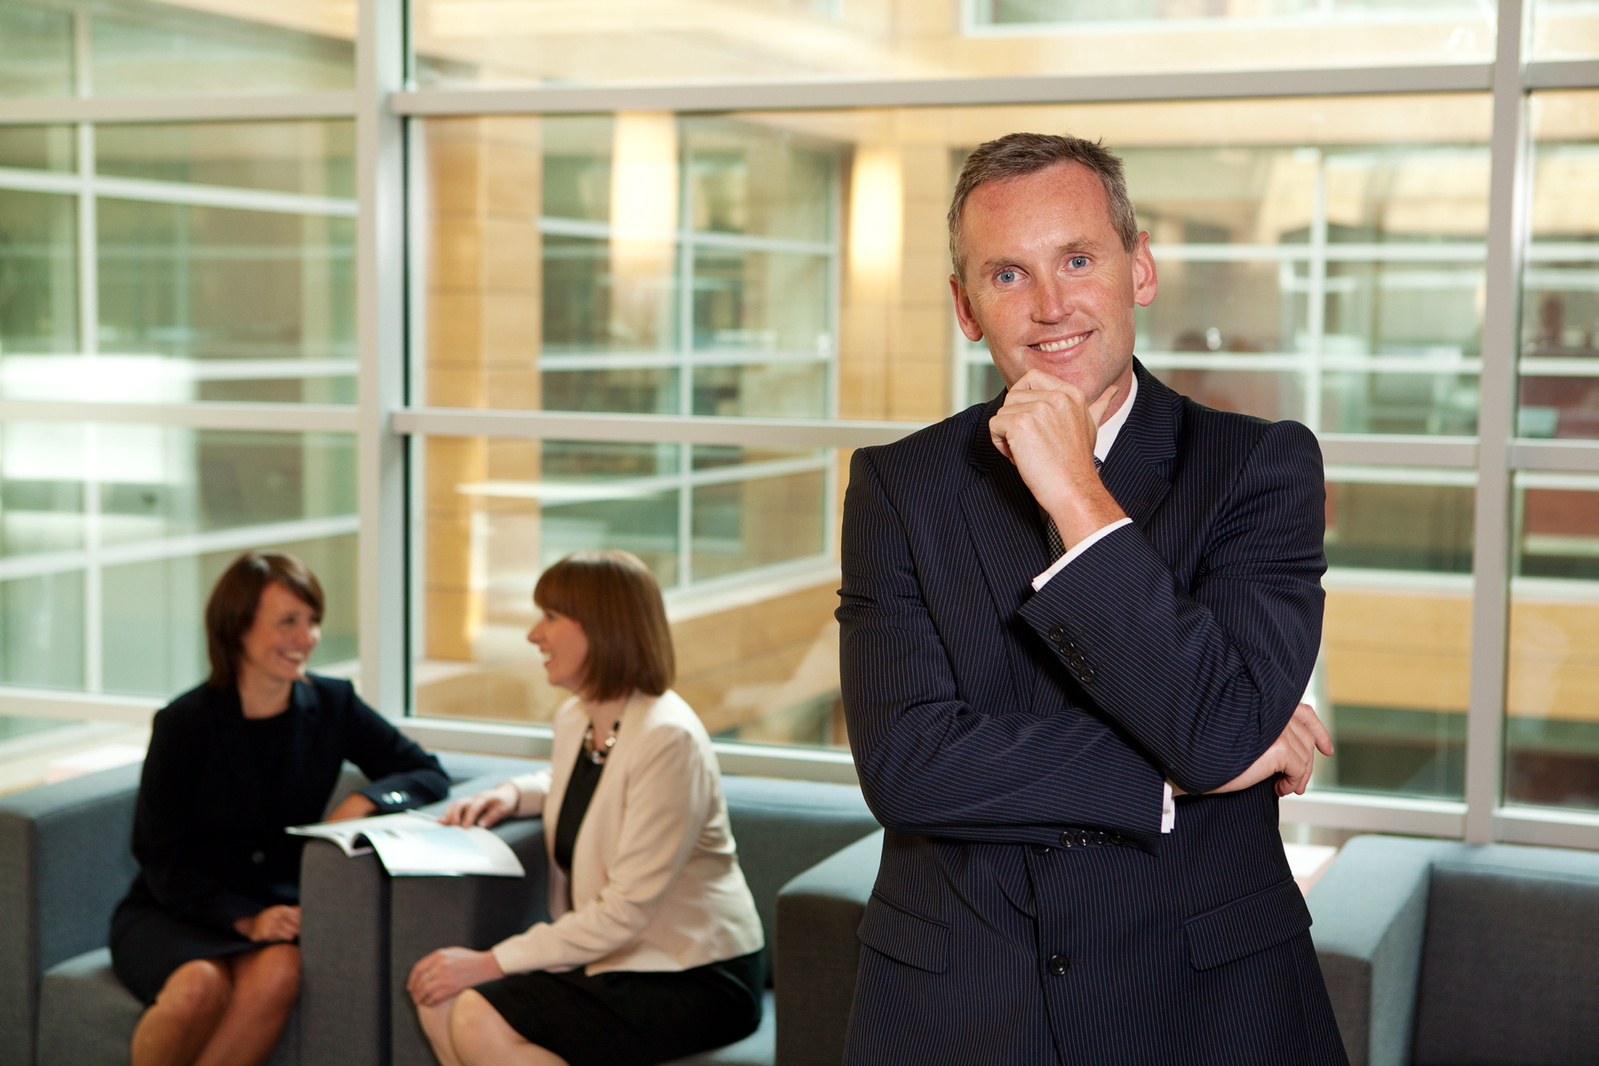 Professional business portrait of company director smiling with corporate meeting in office background